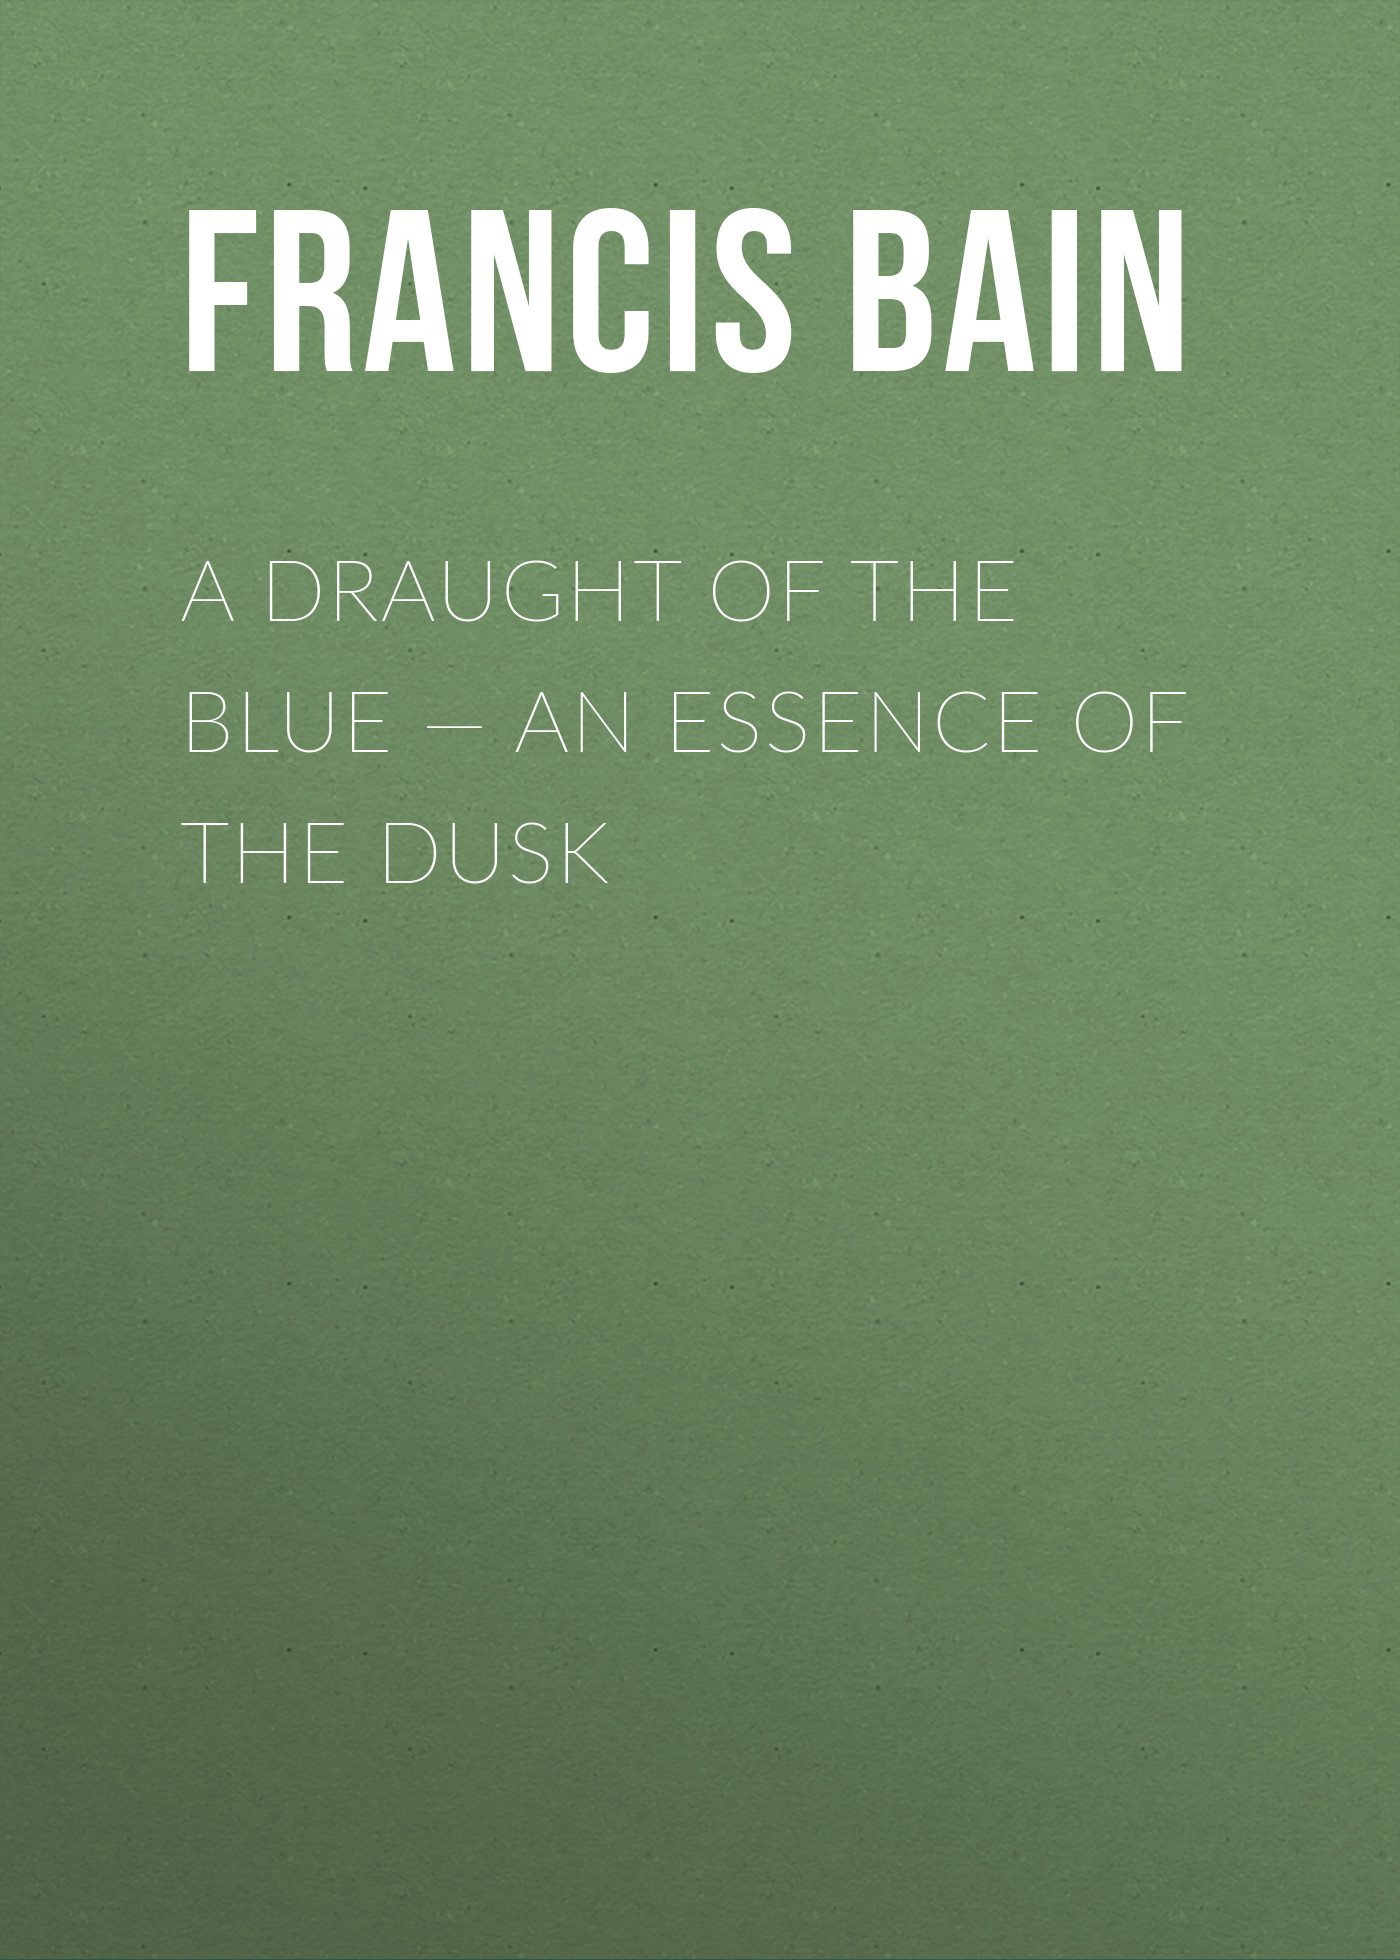 A Draught of the Blue– An Essence of the Dusk